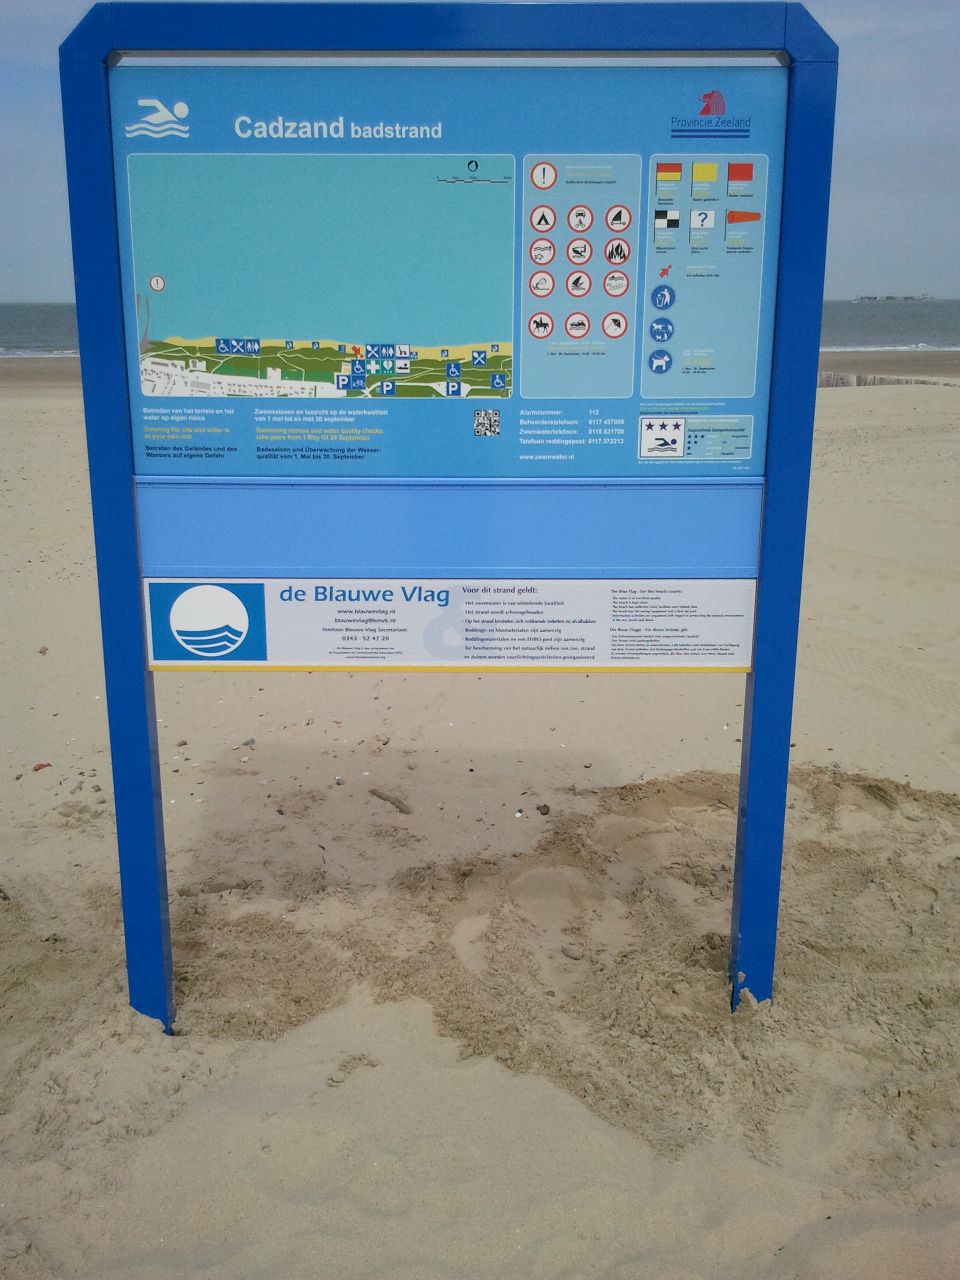 The information board at the swimming location Cadzand overgang de Brabander